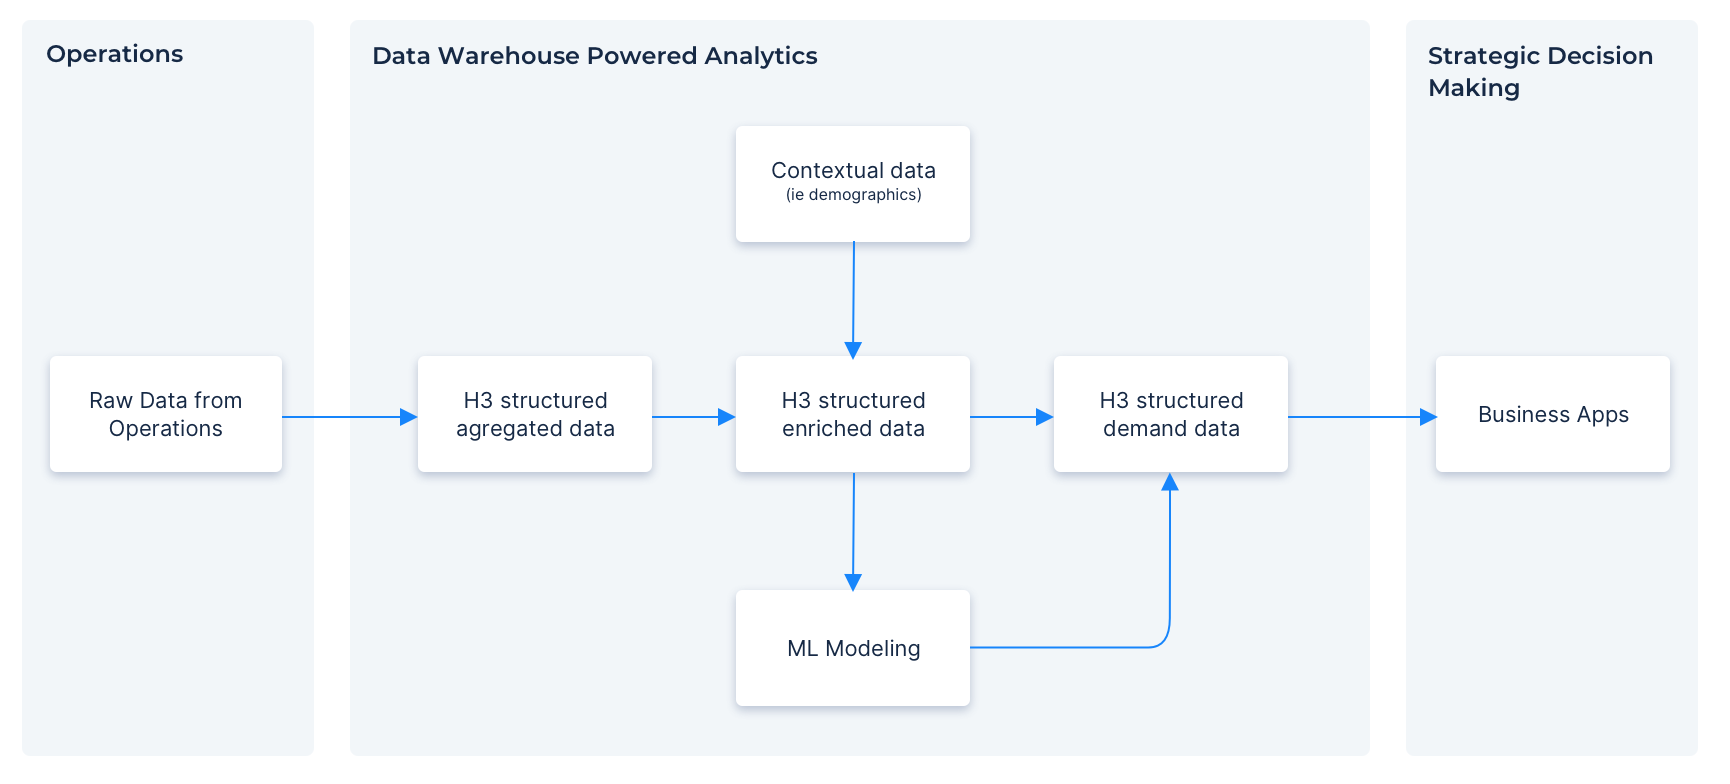 Figure 5 – Diagram illustrating the process of using H3-powered analytics for strategic decision-making